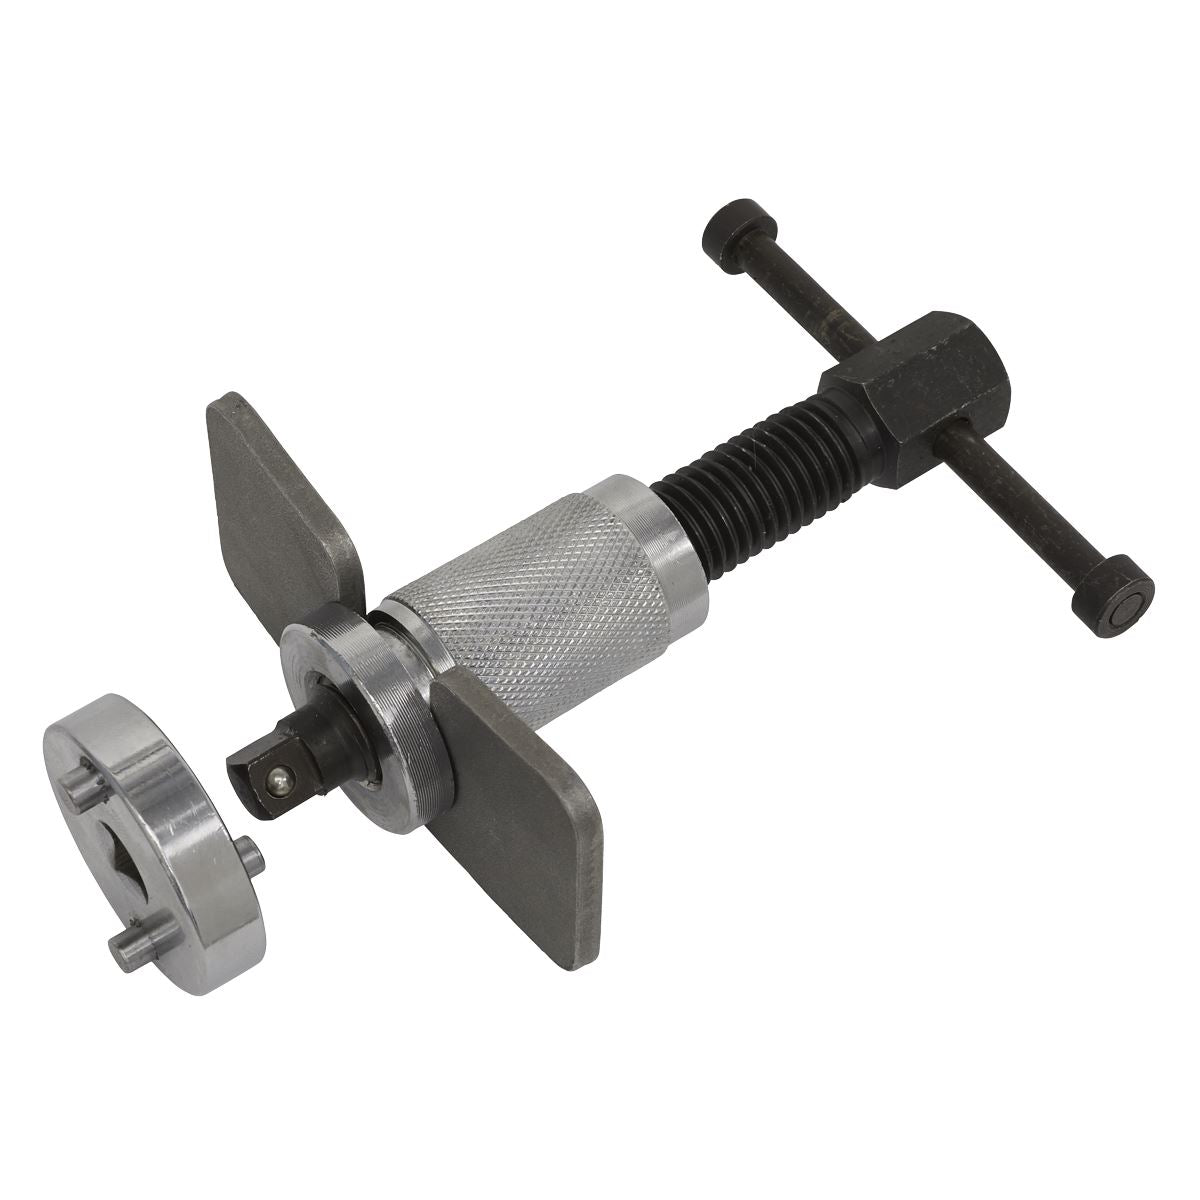 Sealey Brake Piston Wind-Back Tool with Double Adaptor Left-Handed